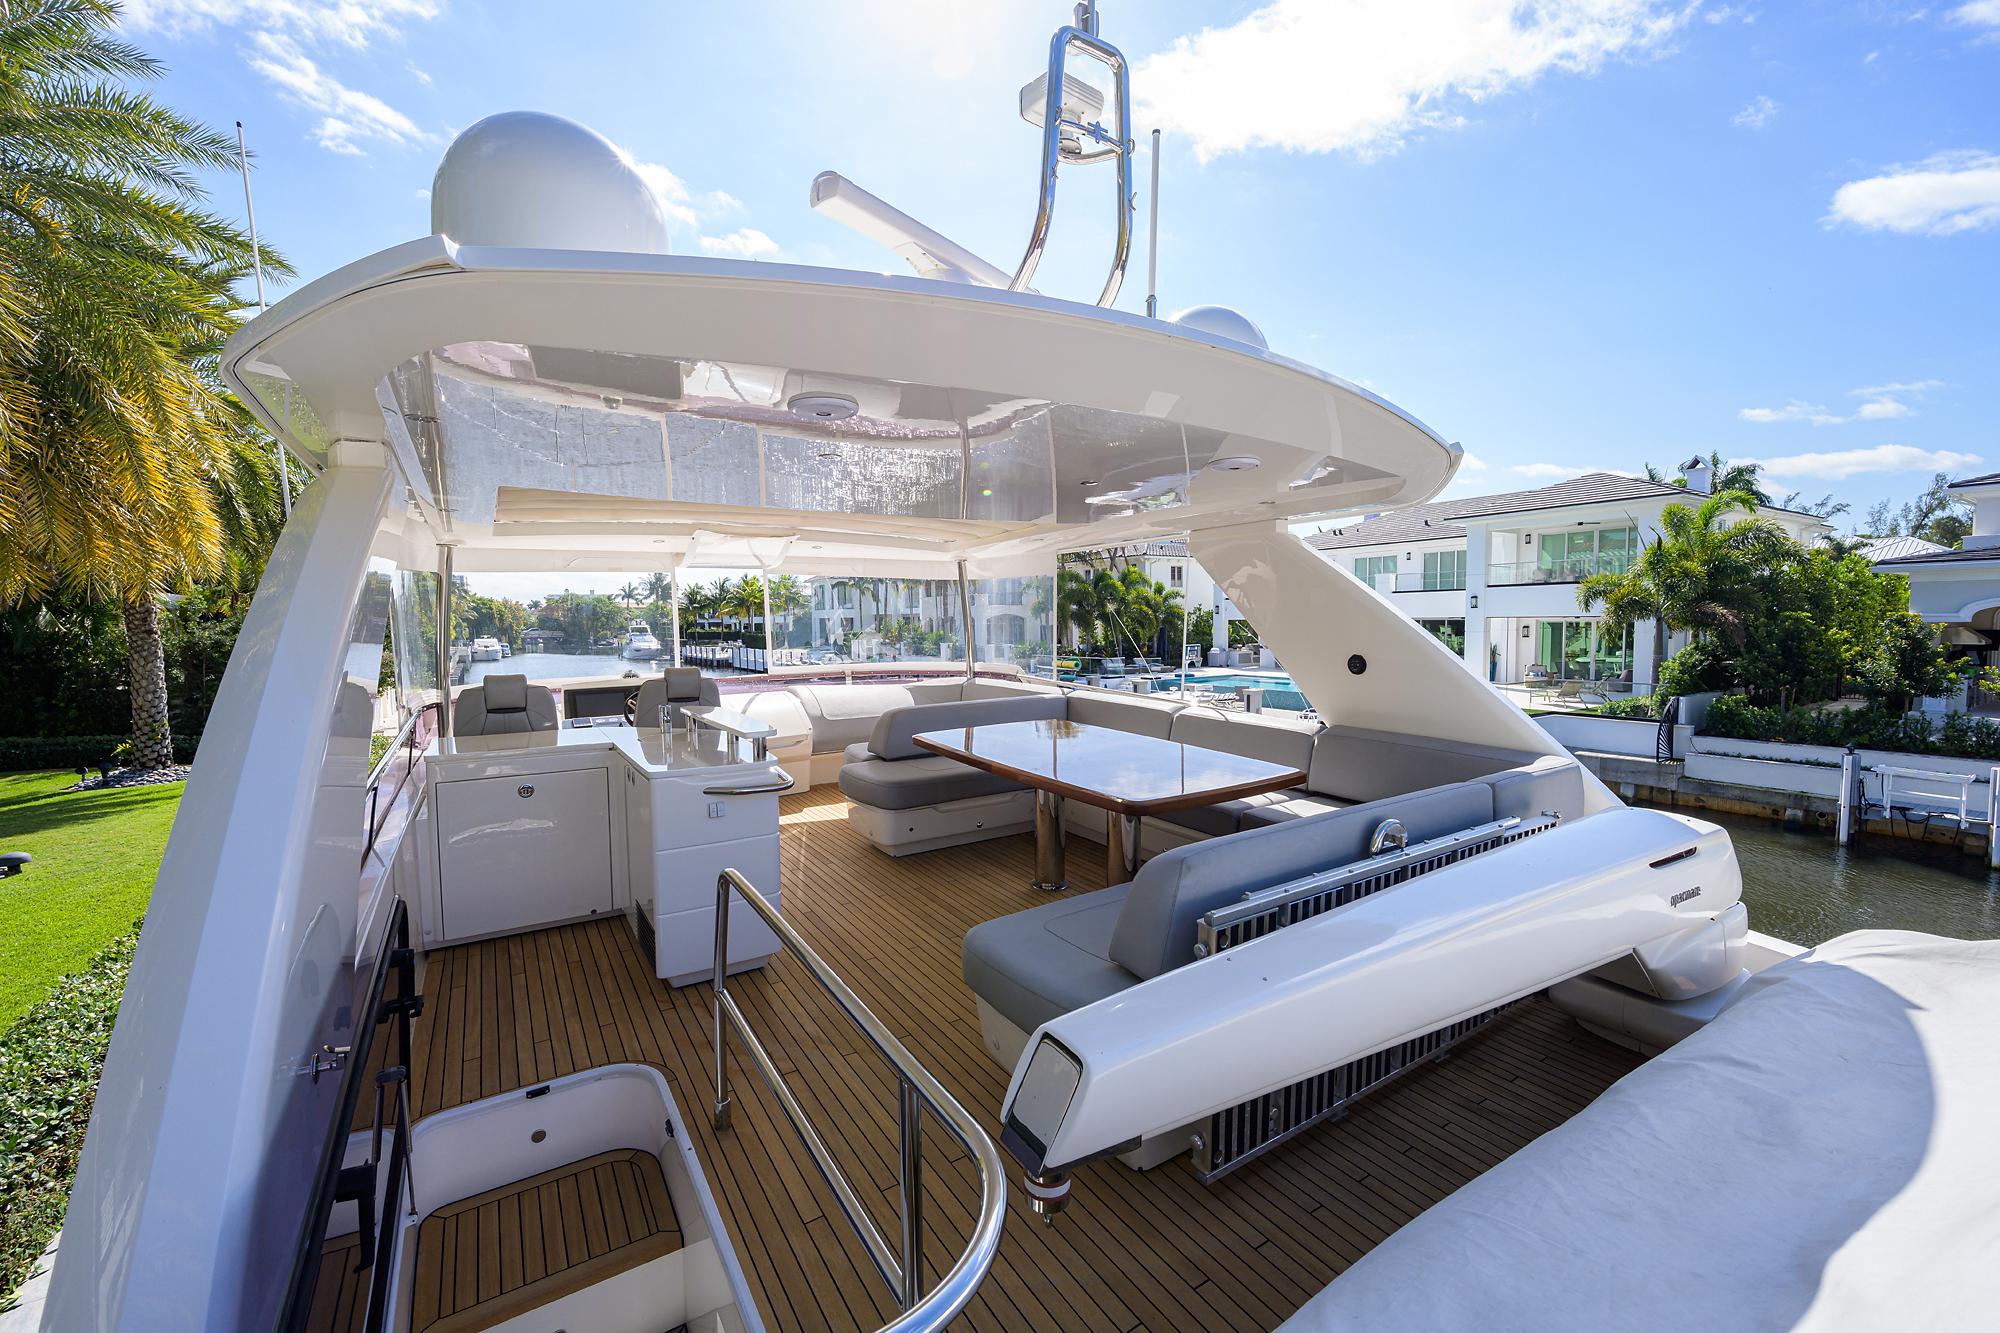 Princess 68 Khatch You Later - Flybridge Seating and Table